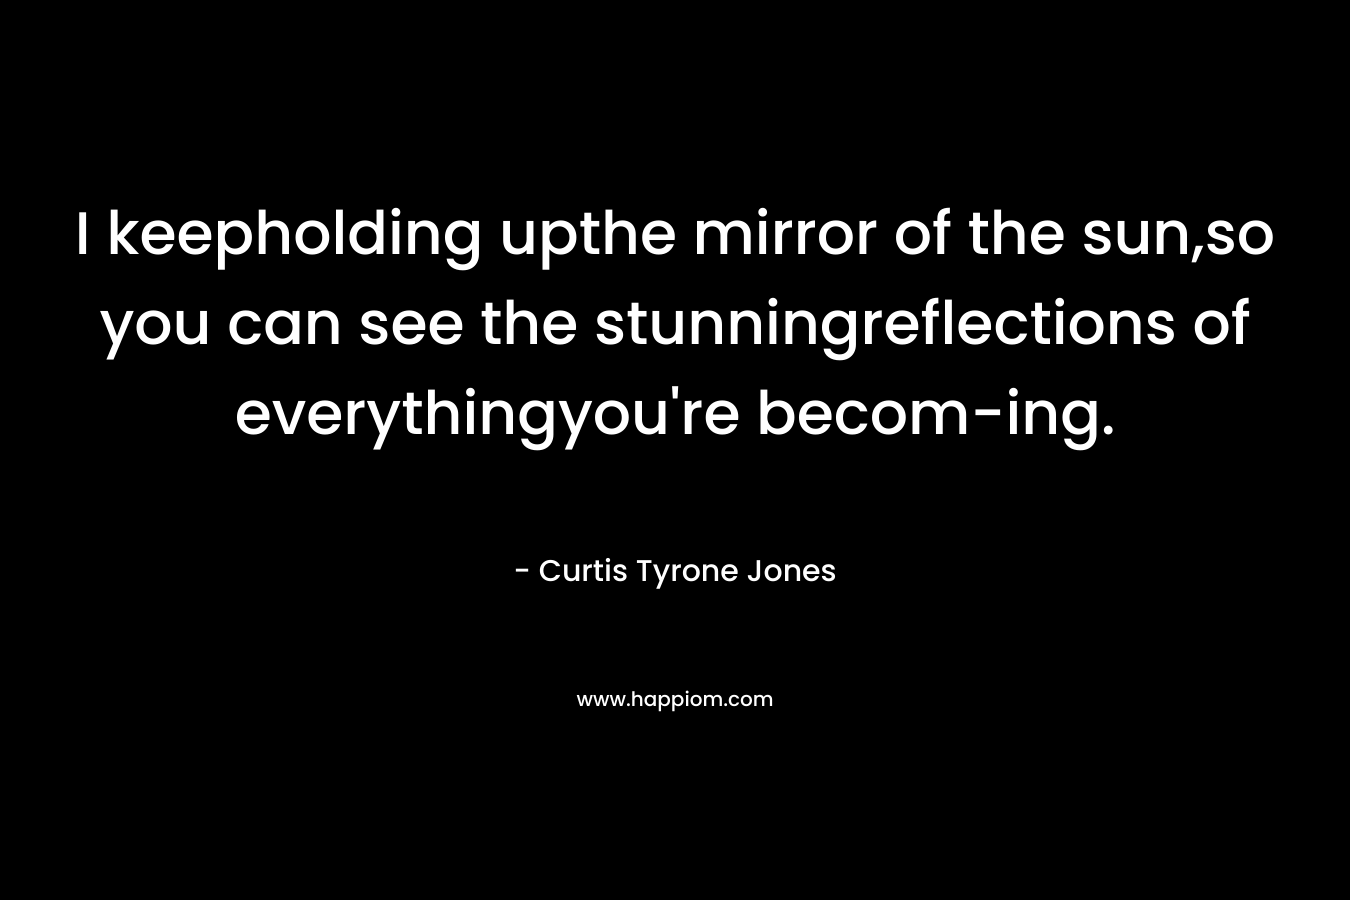 I keepholding upthe mirror of the sun,so you can see the stunningreflections of everythingyou're becom-ing.